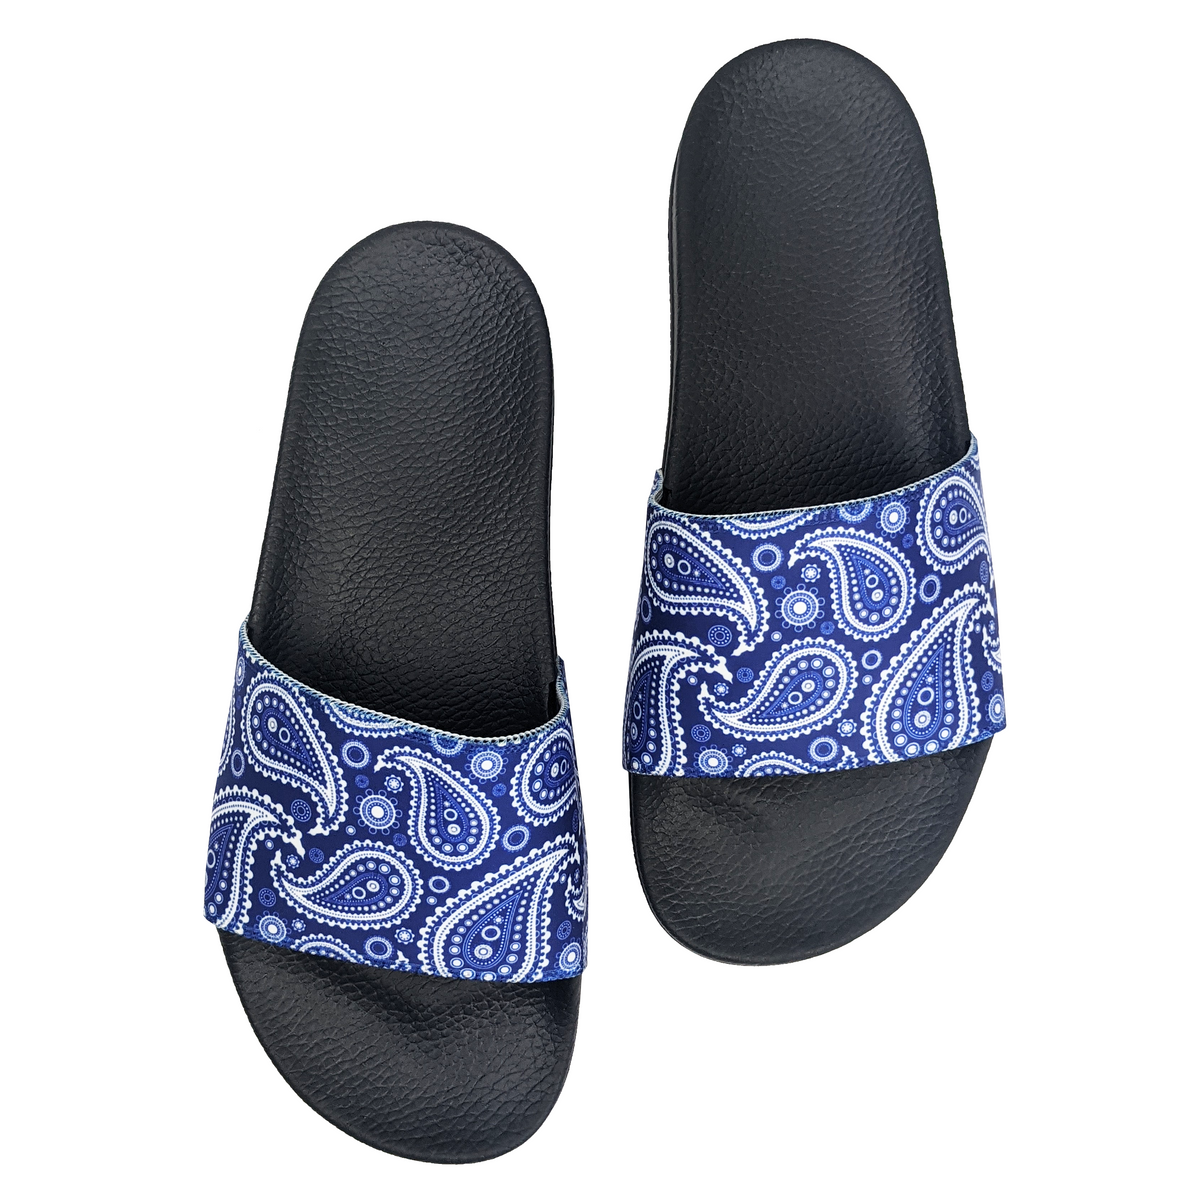 Bandana Paisley Soft Sole Sllipers Home Clogs Black White Blue Step On  Water Shoes Mens Womens Teenager Step in Custom Sandals - AliExpress